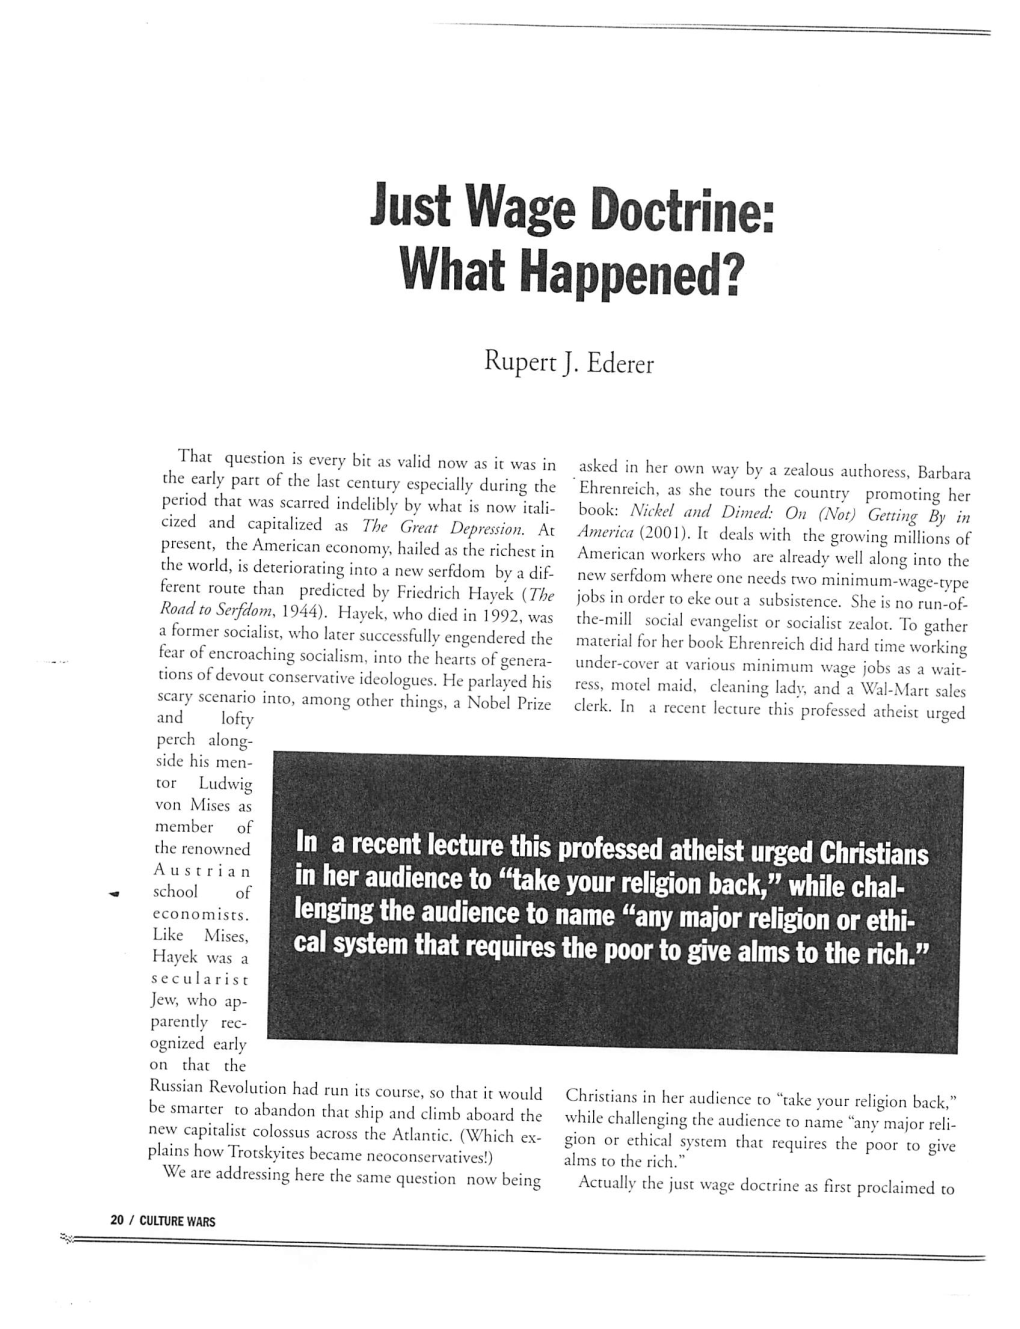 Just Wage Doctrine: What Happened?